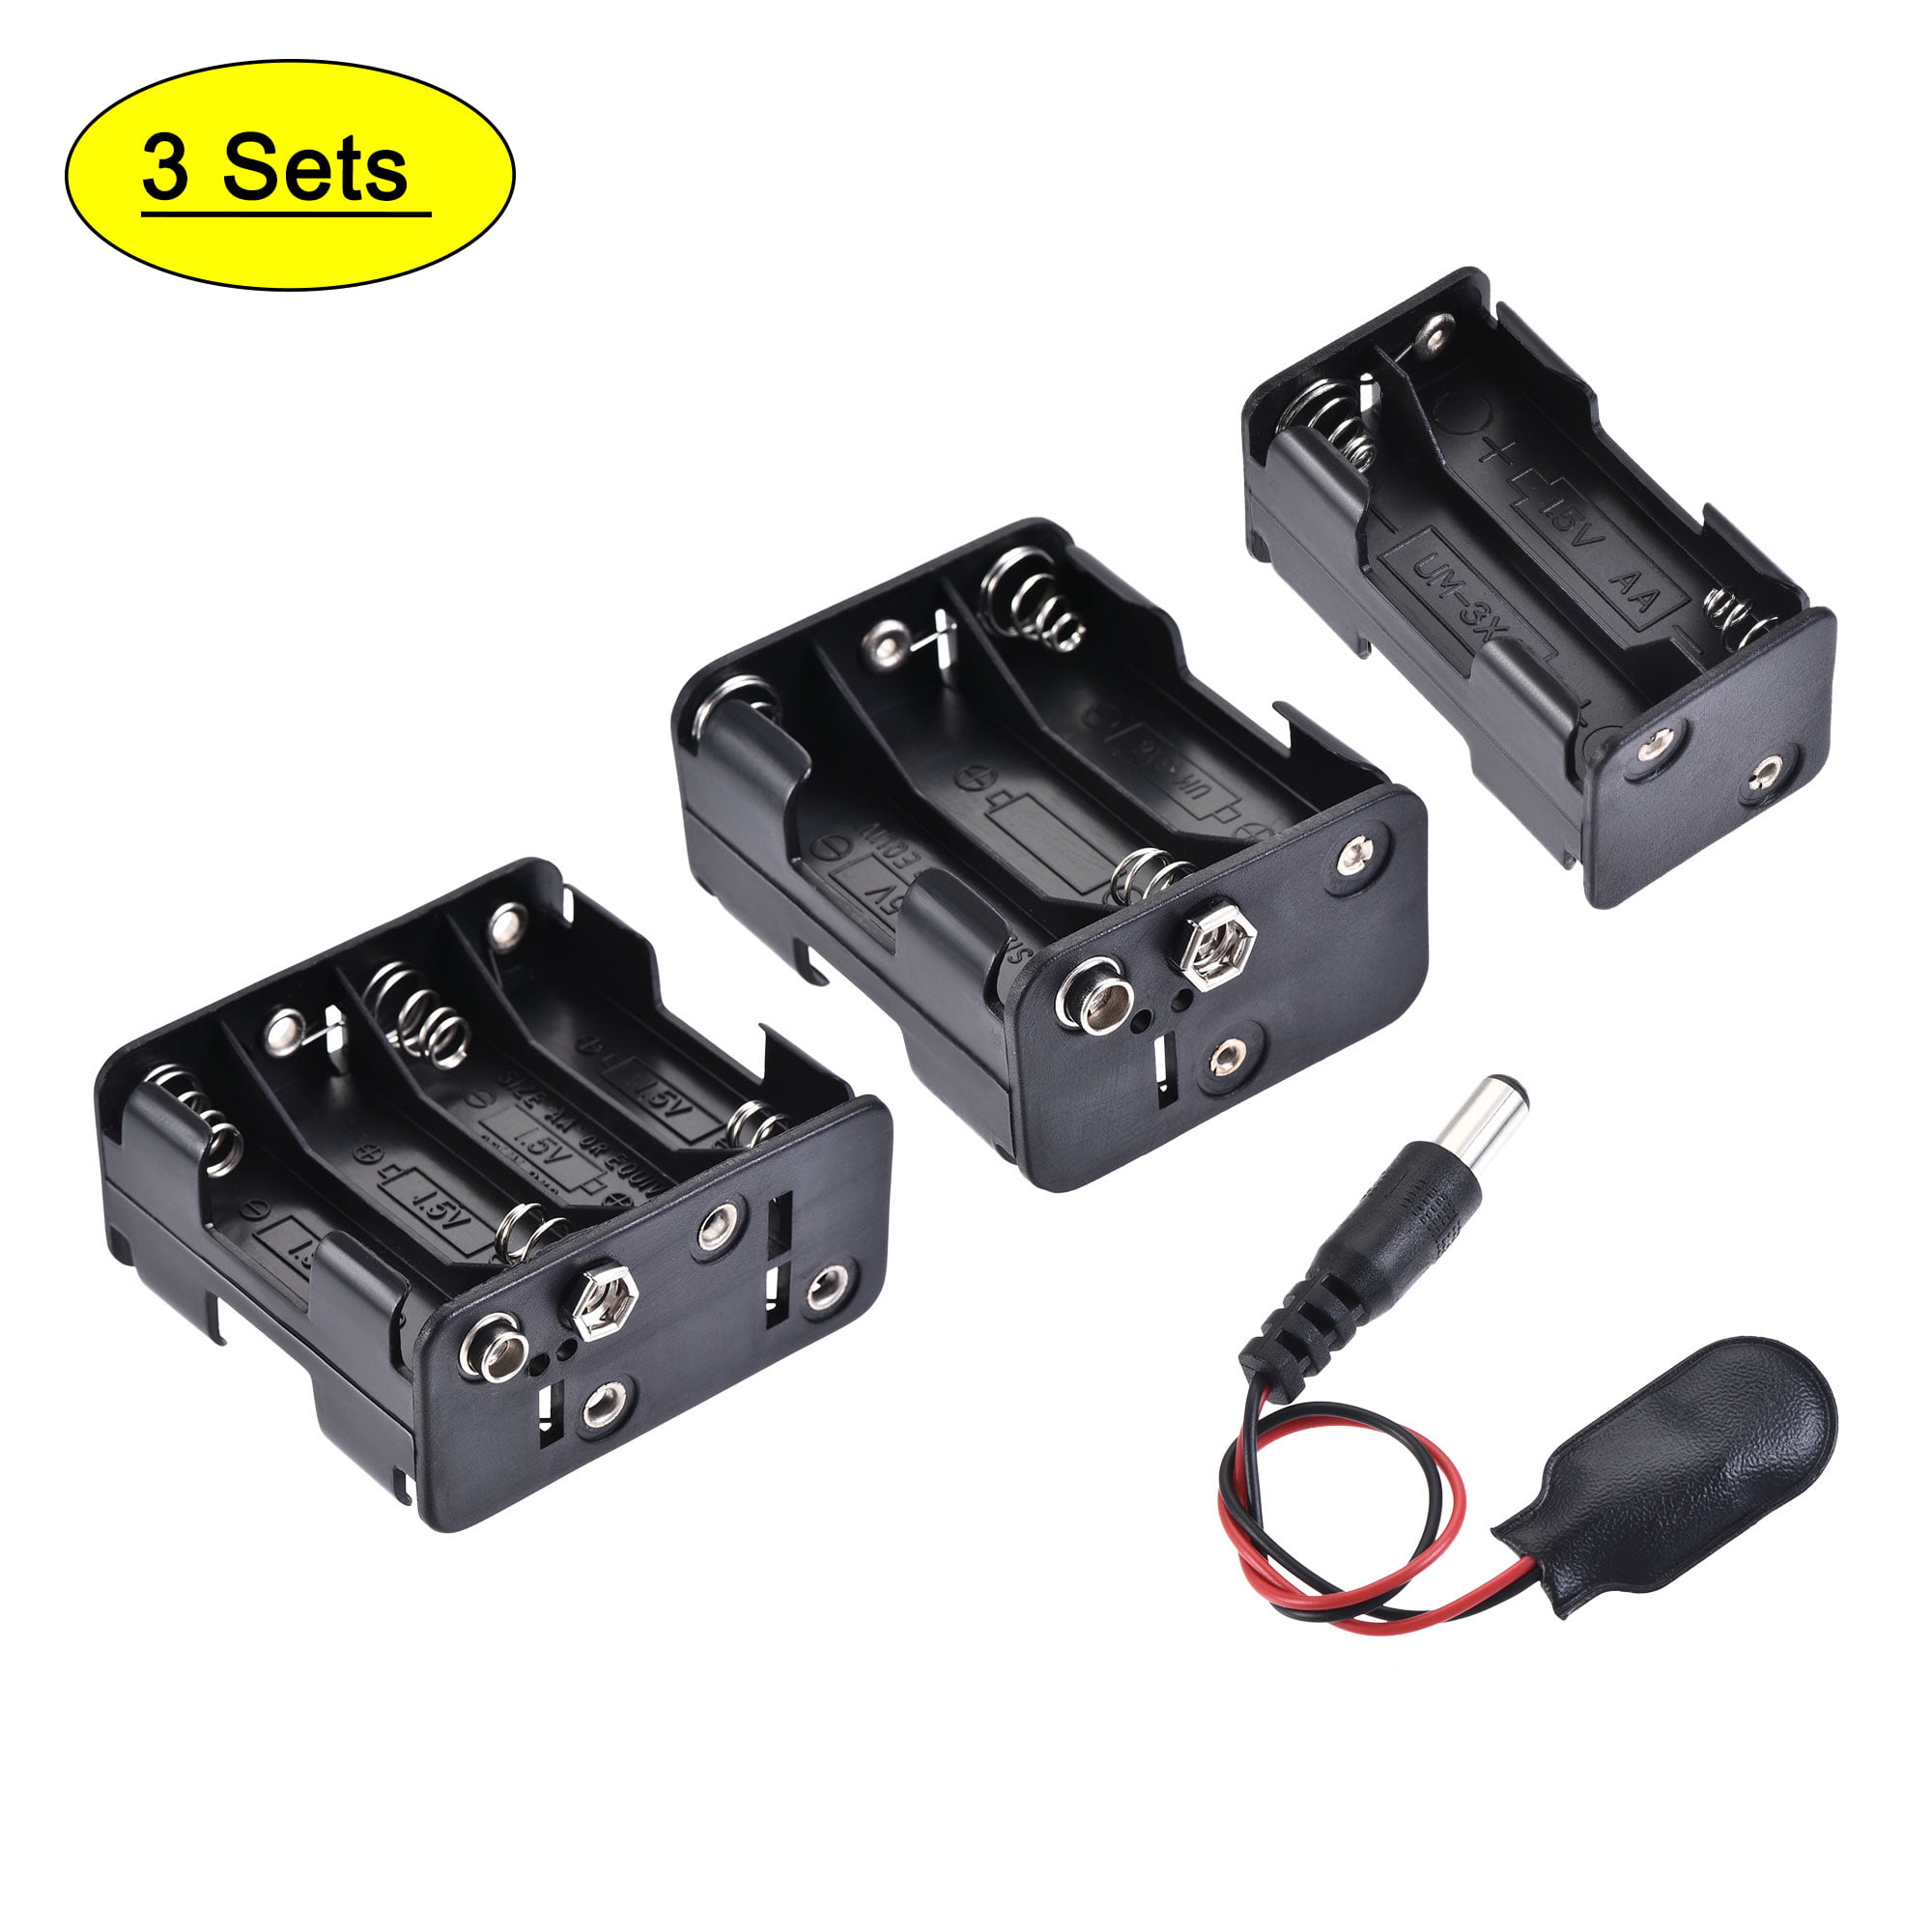 10pcs Two Sides 8 x 1.5V AA Batteries Holder Case Cell Box w 9V Battery Clip 